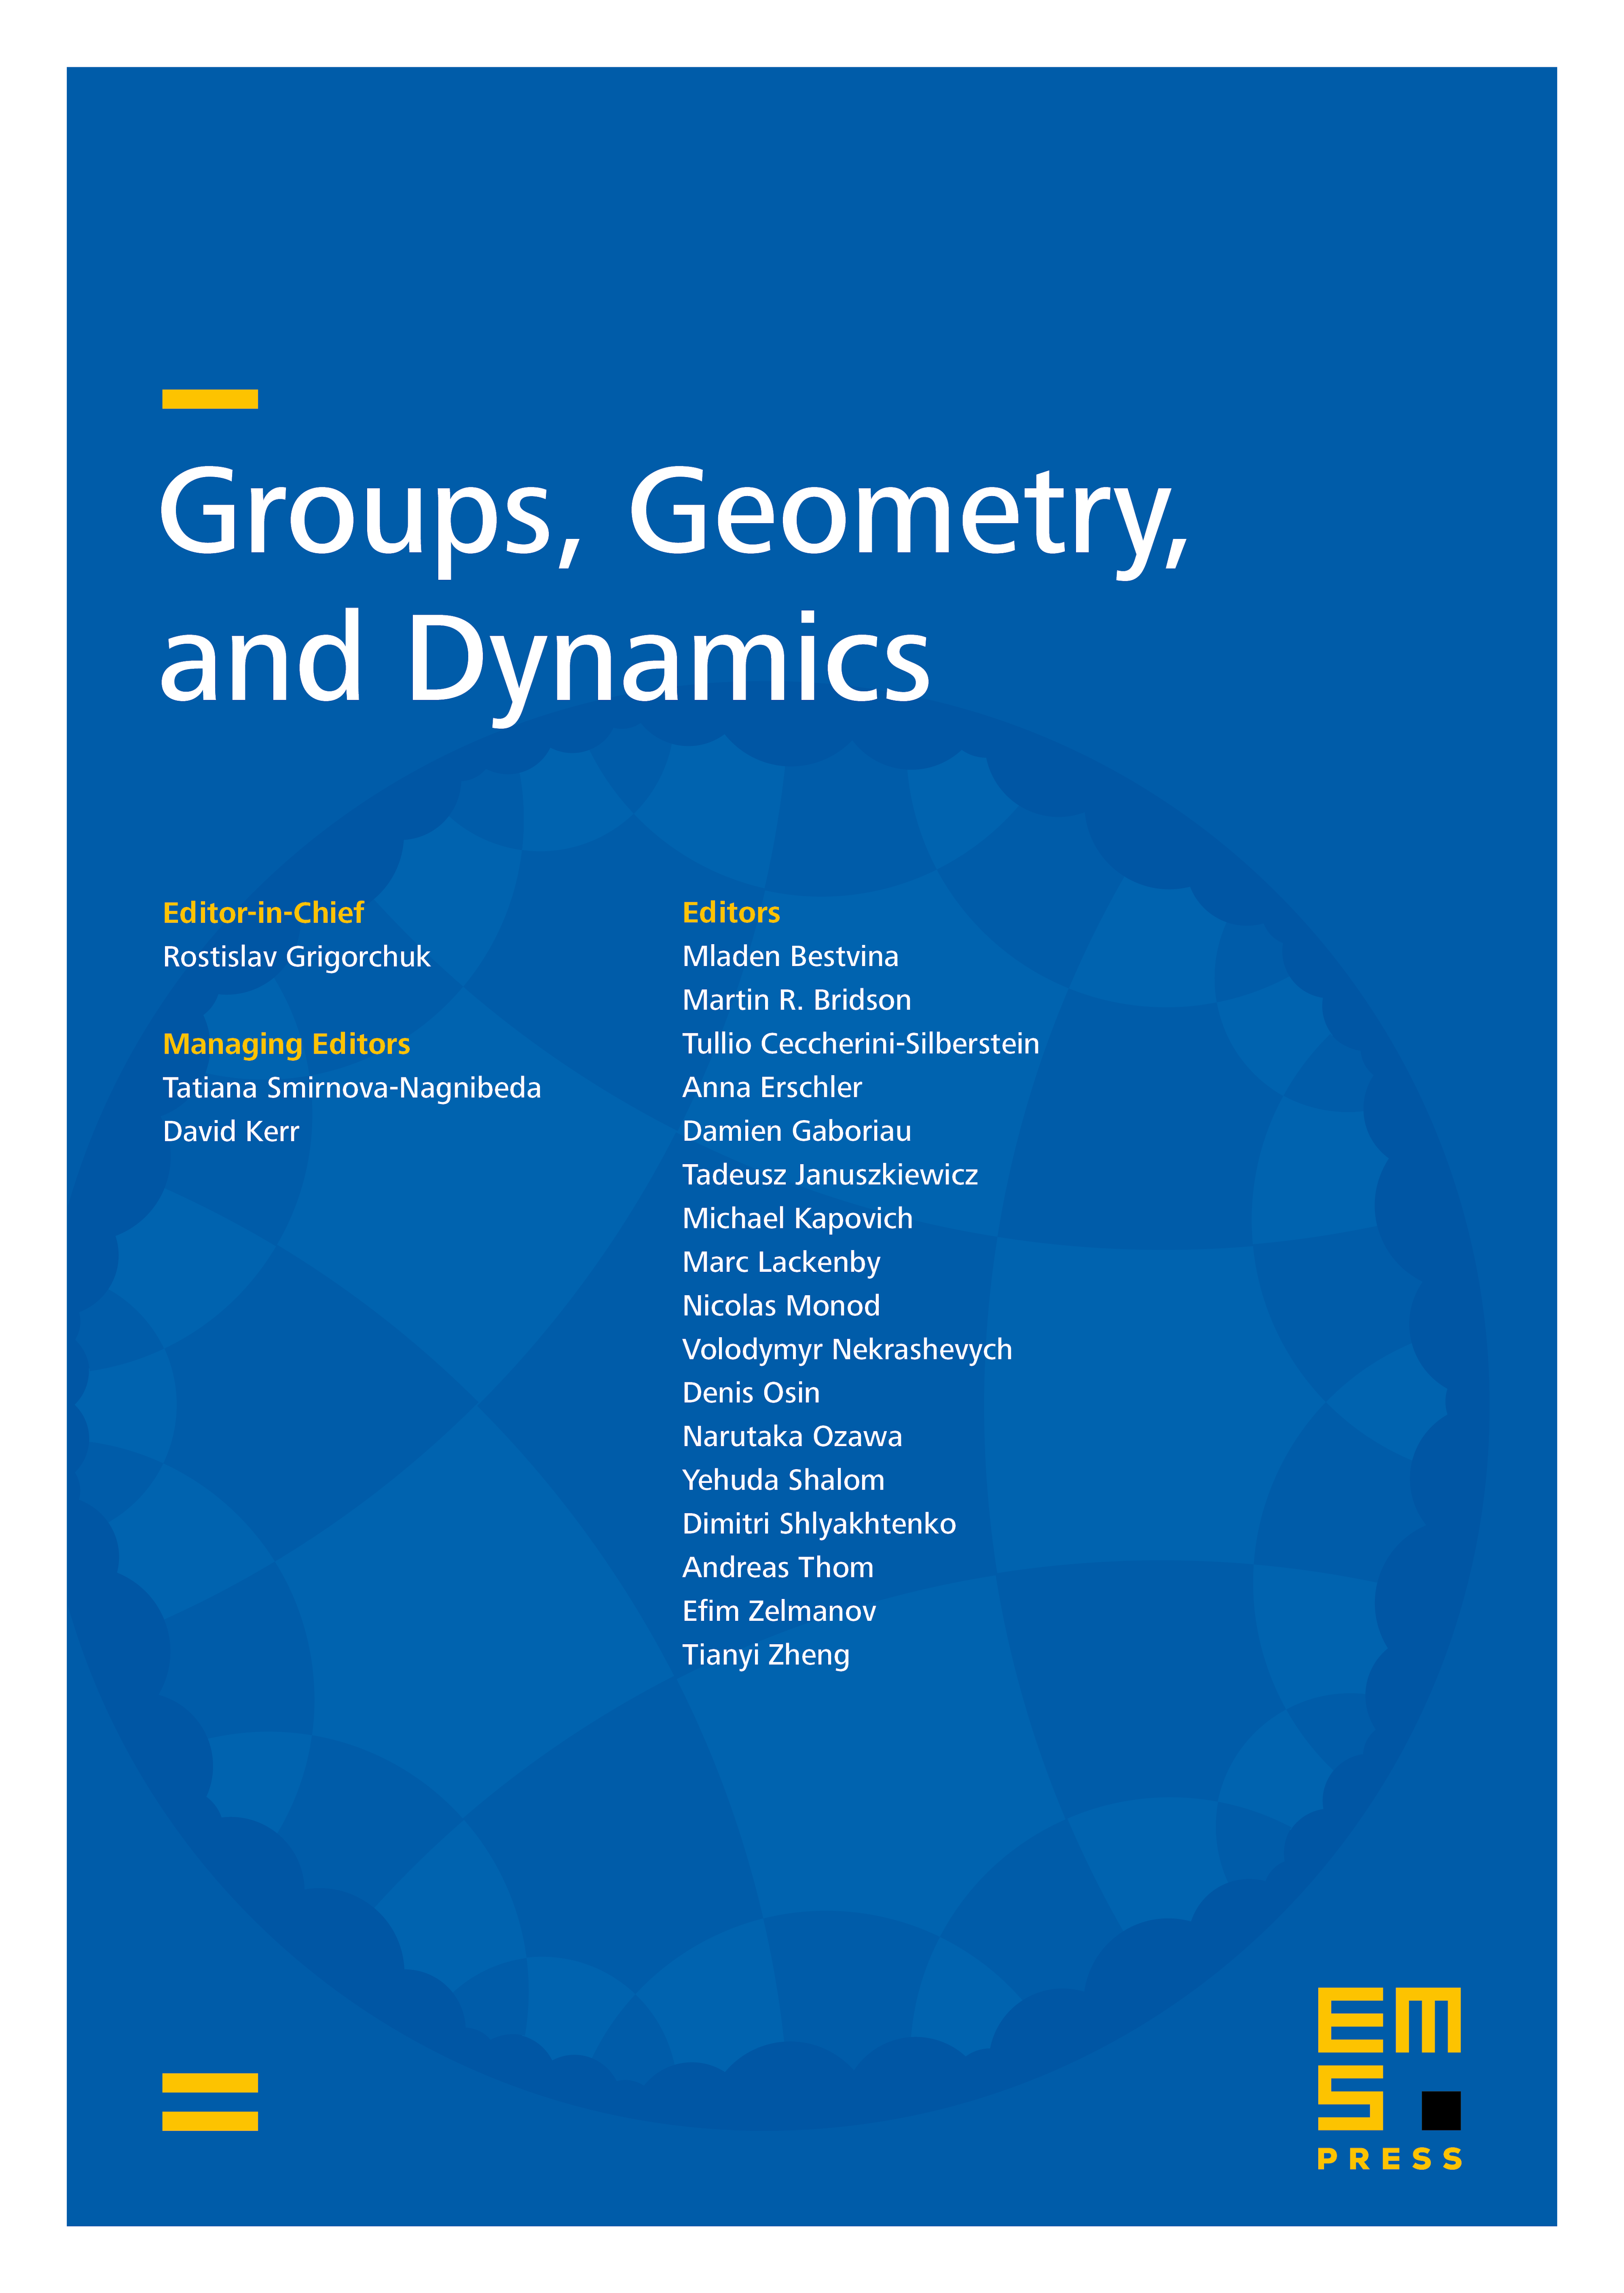 Mixing, malnormal subgroups and cohomology in degree one cover